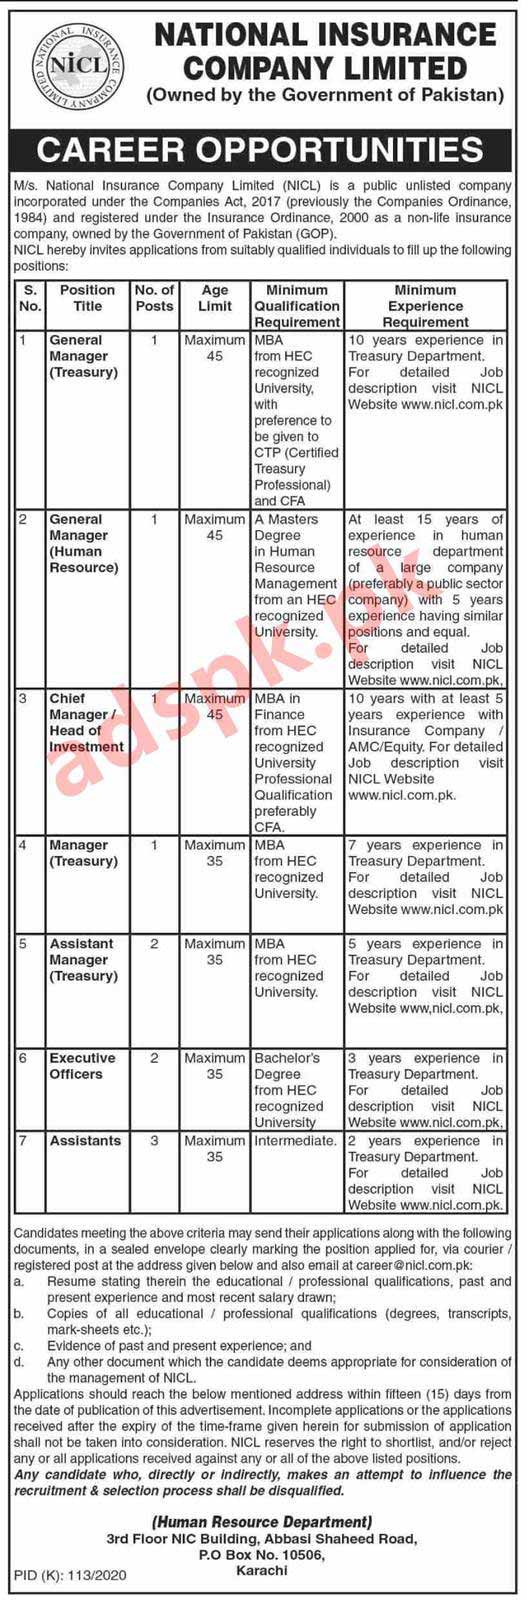 National Insurance Company Limited PO Box 10506 Karachi Jobs 2020 for General Managers Chief Manager Assistant Managers Jobs Application Deadline 03-08-2020 Apply Now